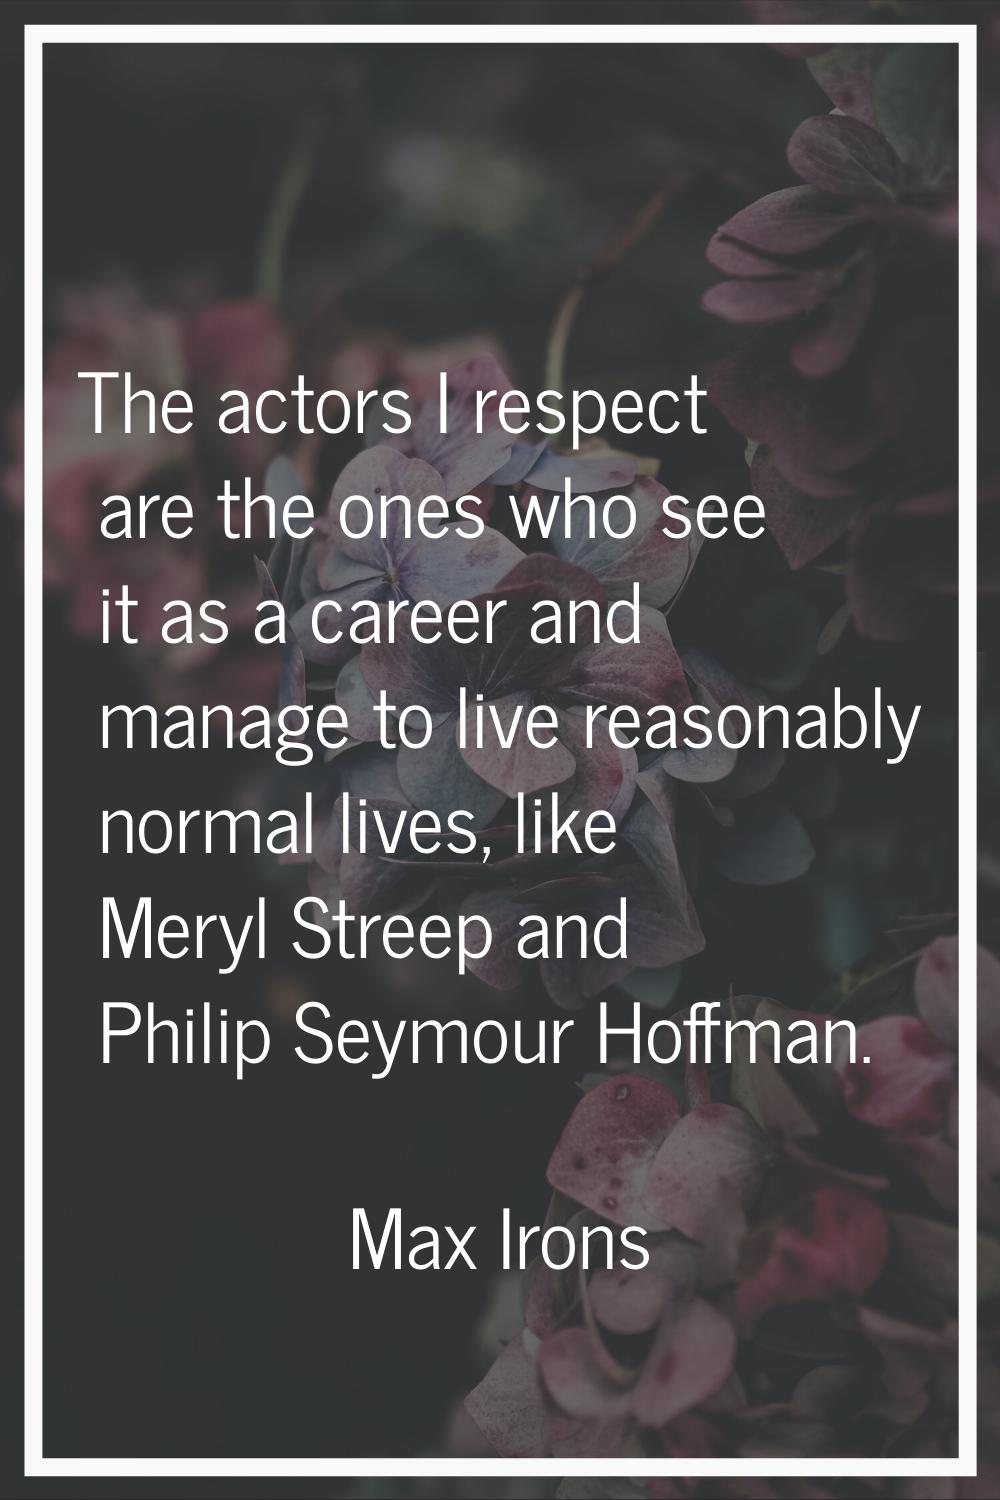 The actors I respect are the ones who see it as a career and manage to live reasonably normal lives